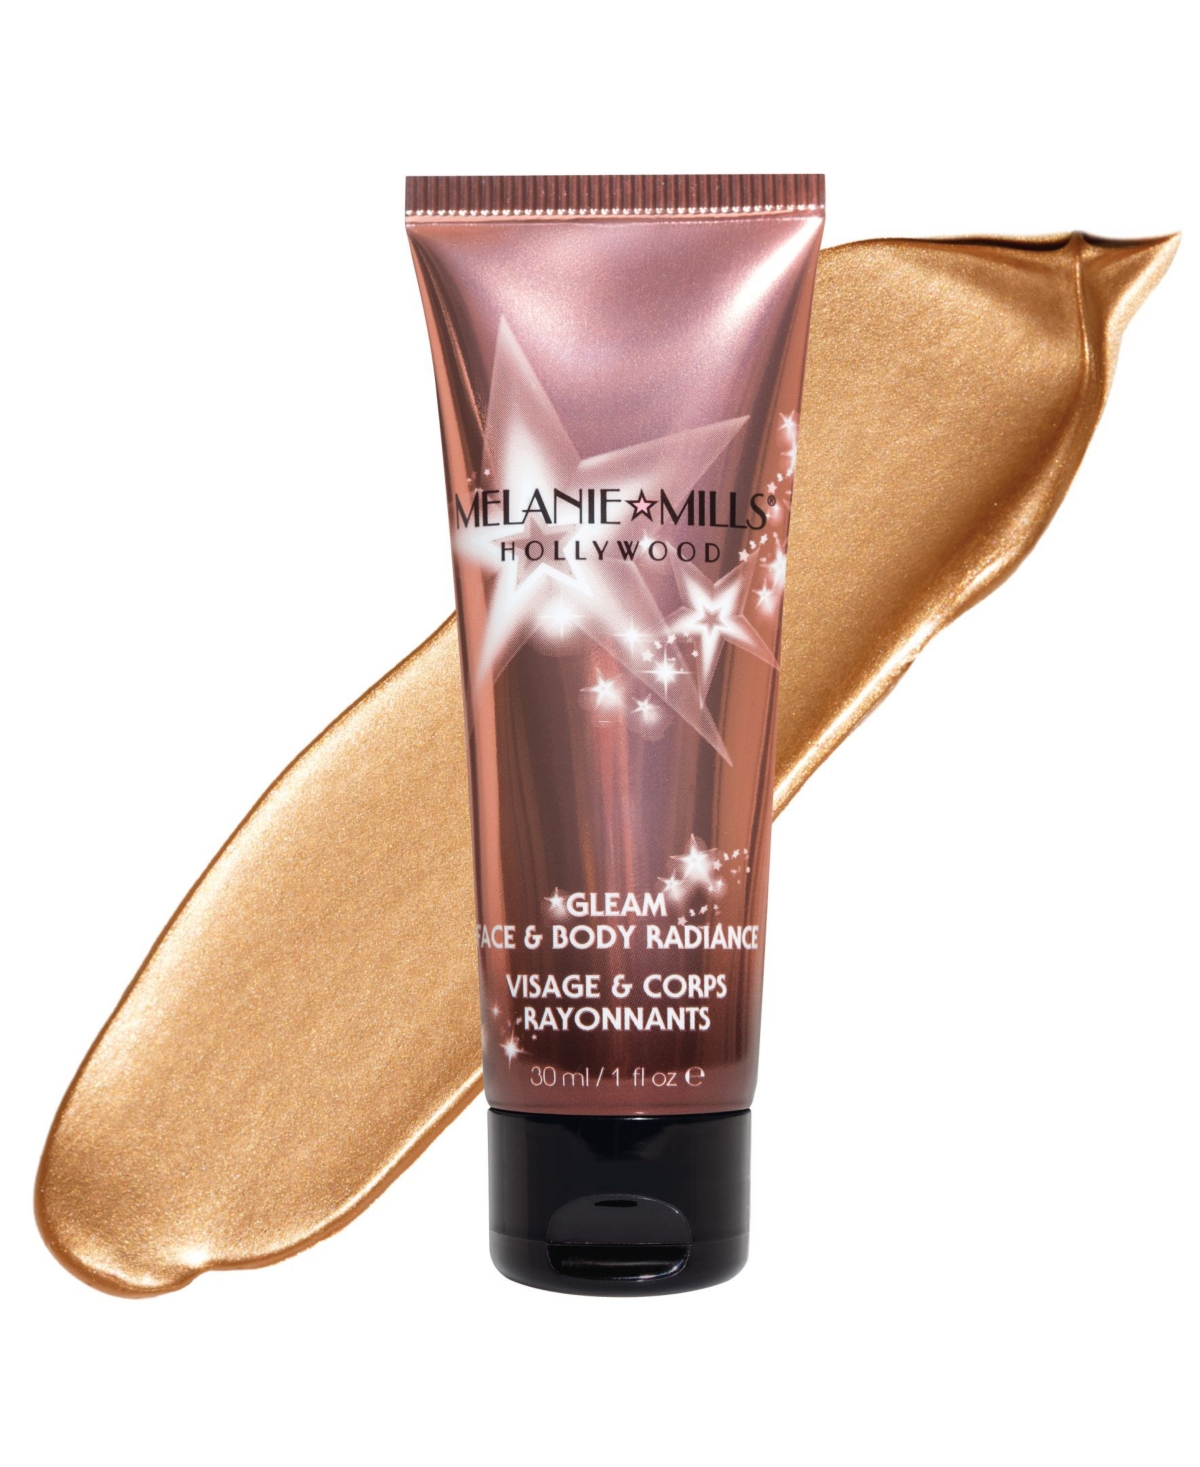 Melanie Mills Hollywood Gleam Face and Body Radiance All in One Makeup, Moisturizer and Glow, 1 oz